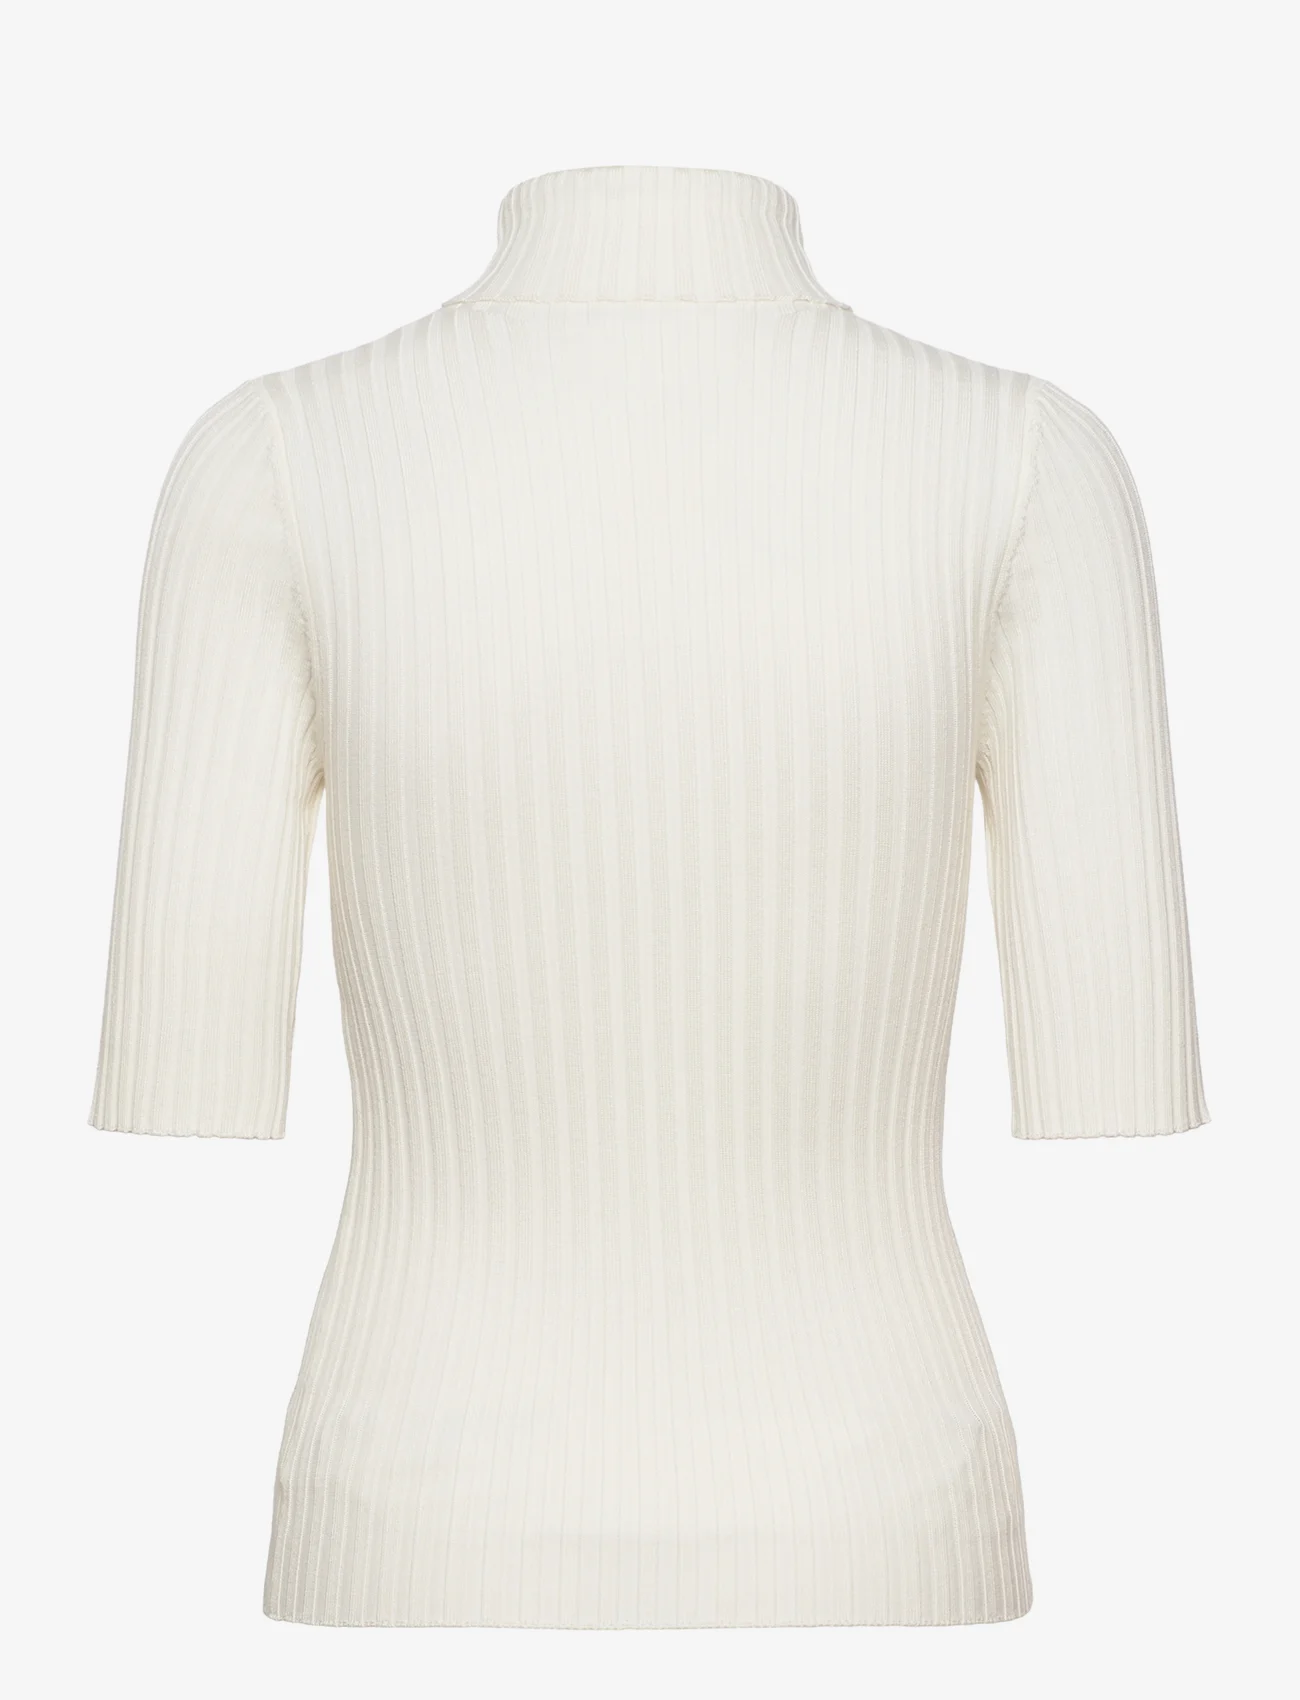 NORR - Franco knit tee - pullover - off-white - 1